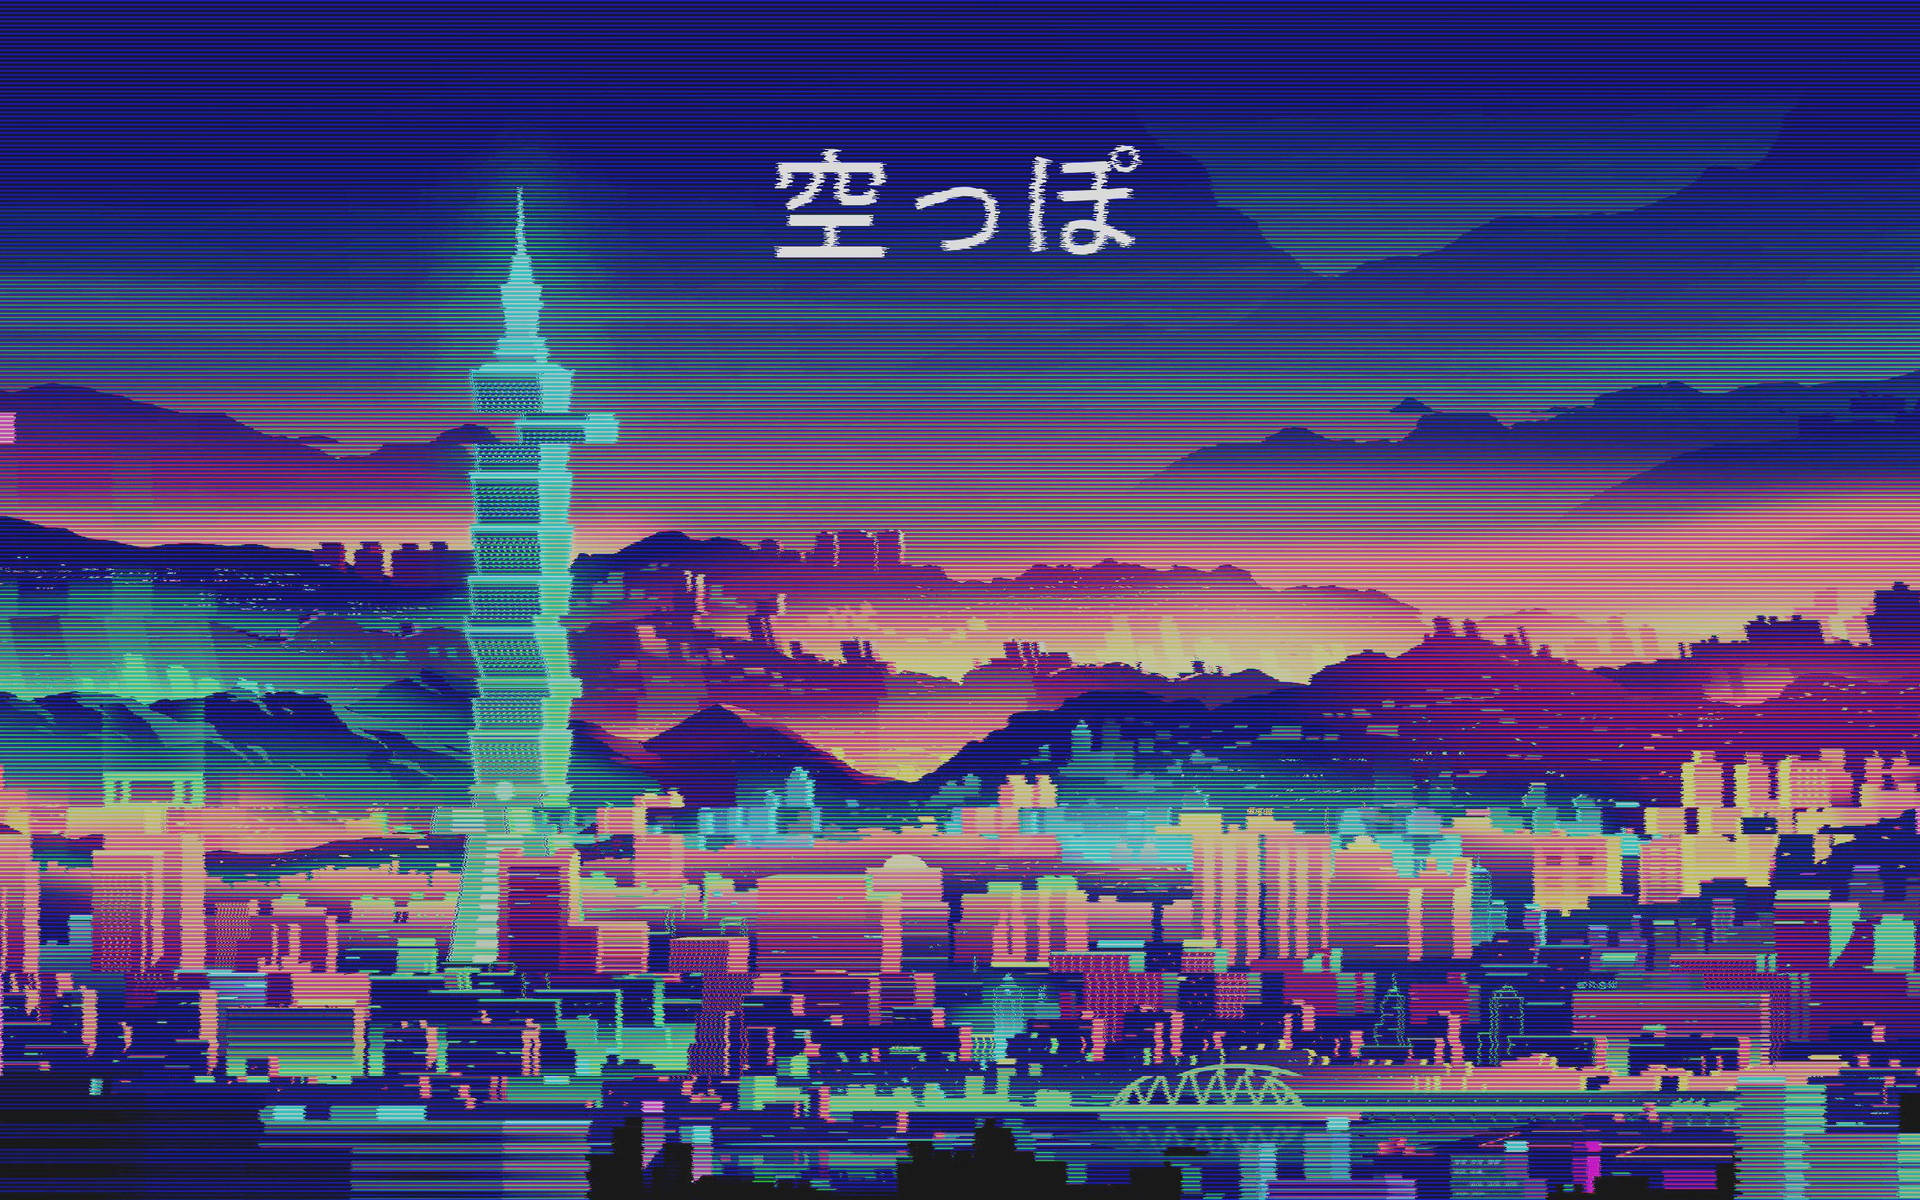 Anime Computer Aesthetic Wallpapers